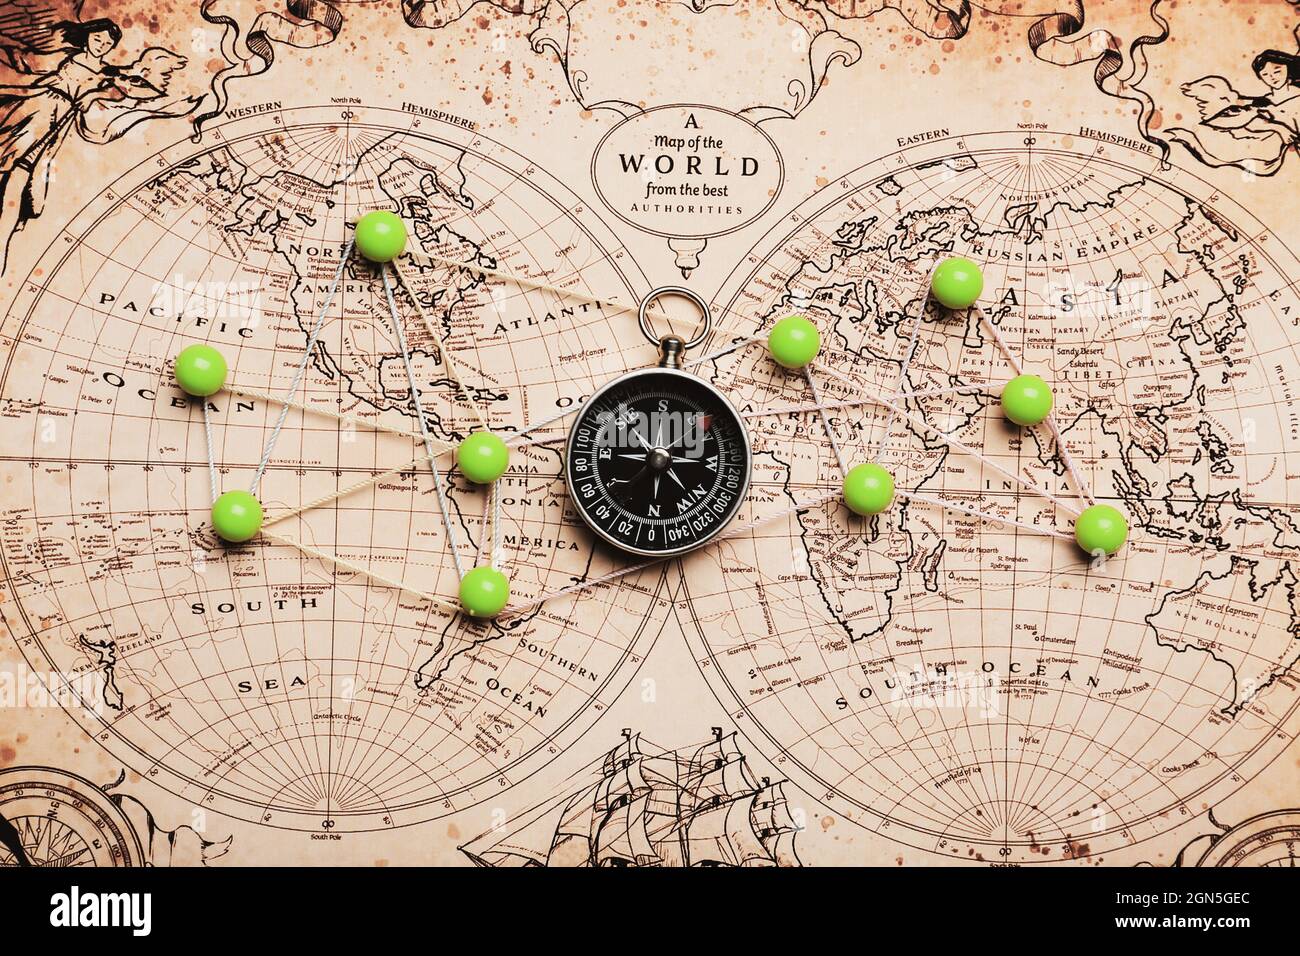 Compass and Chess on old map Stock Photo by ©kwanchaidp 75914739